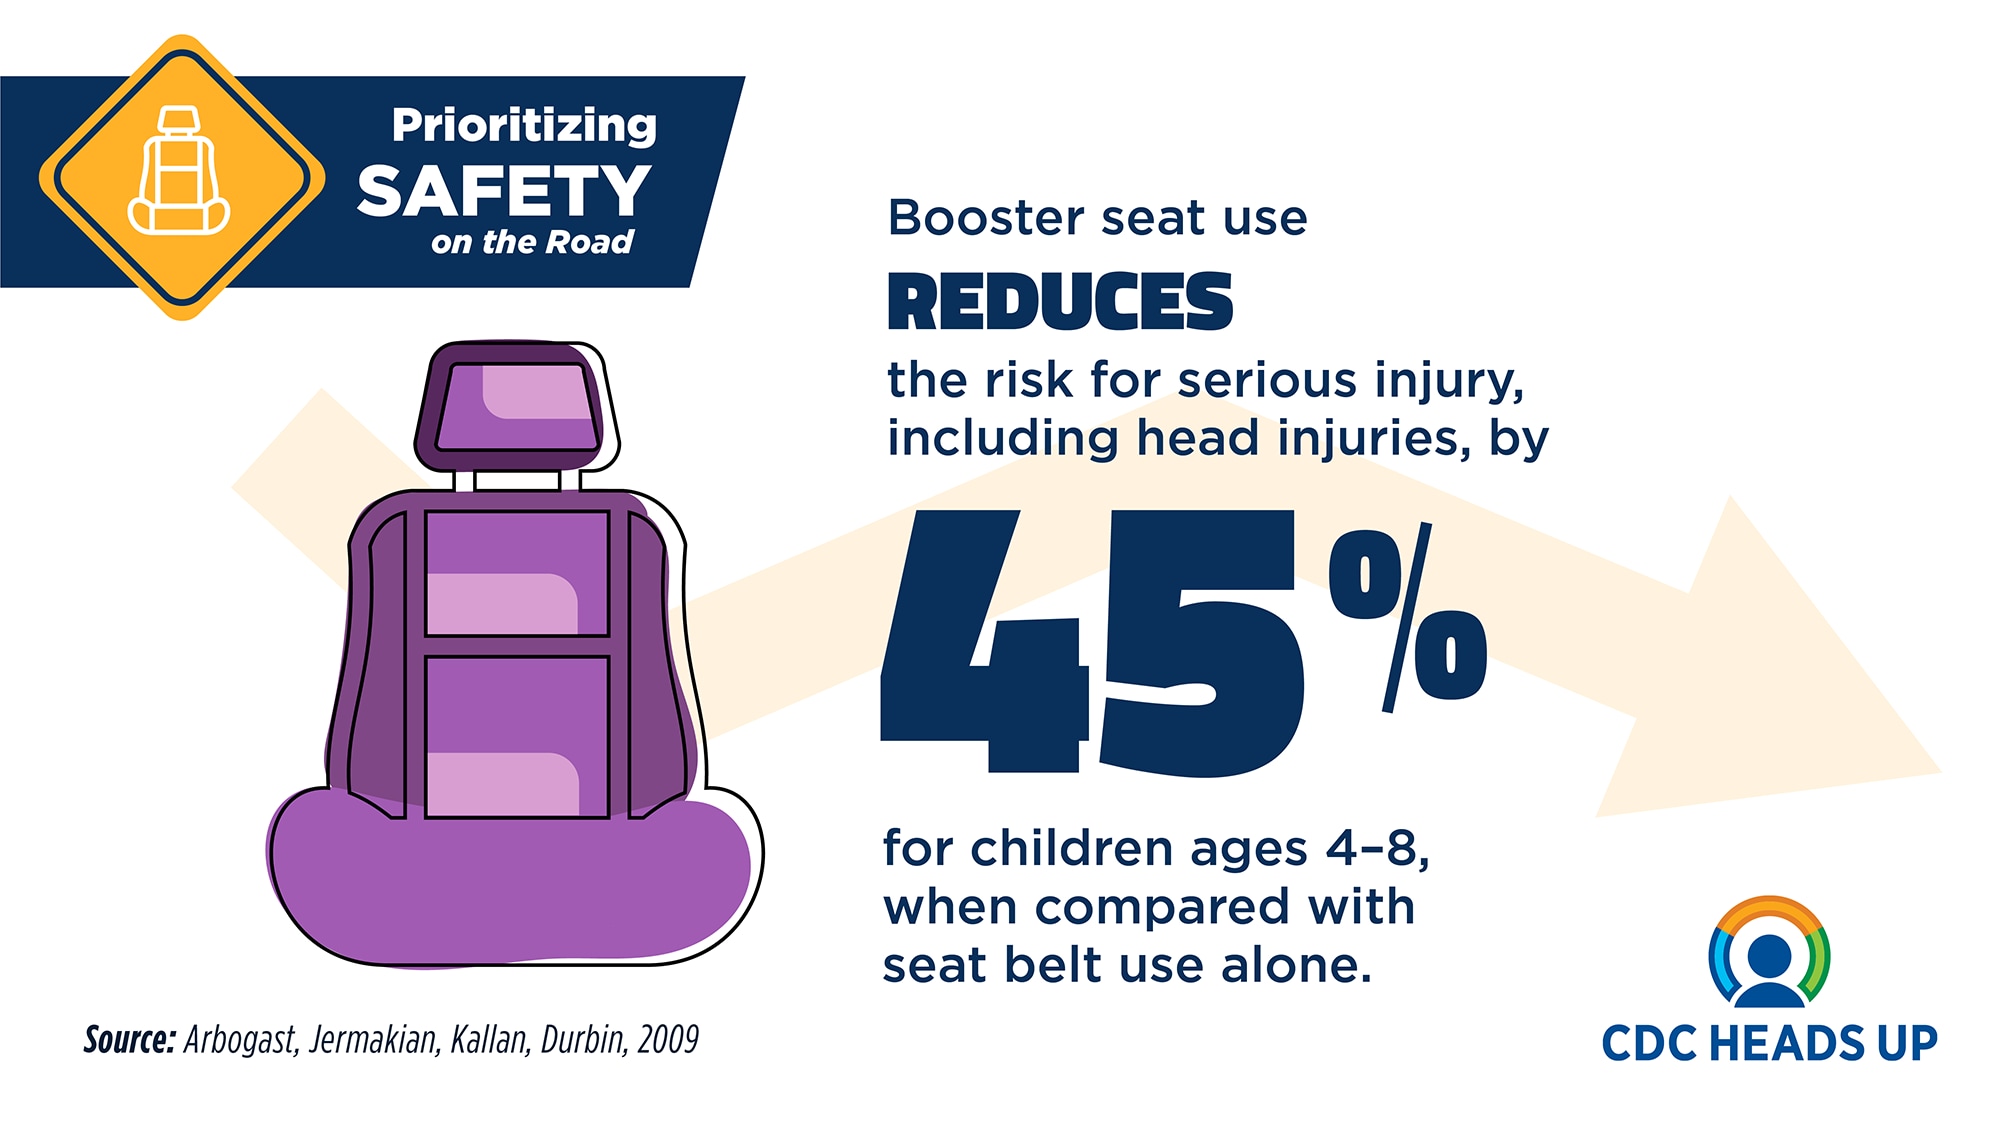 Booster seat use reduces the risk for serious injury, including head injuries, by 45% for children ages 4-8, when compared with seat belt use alone.